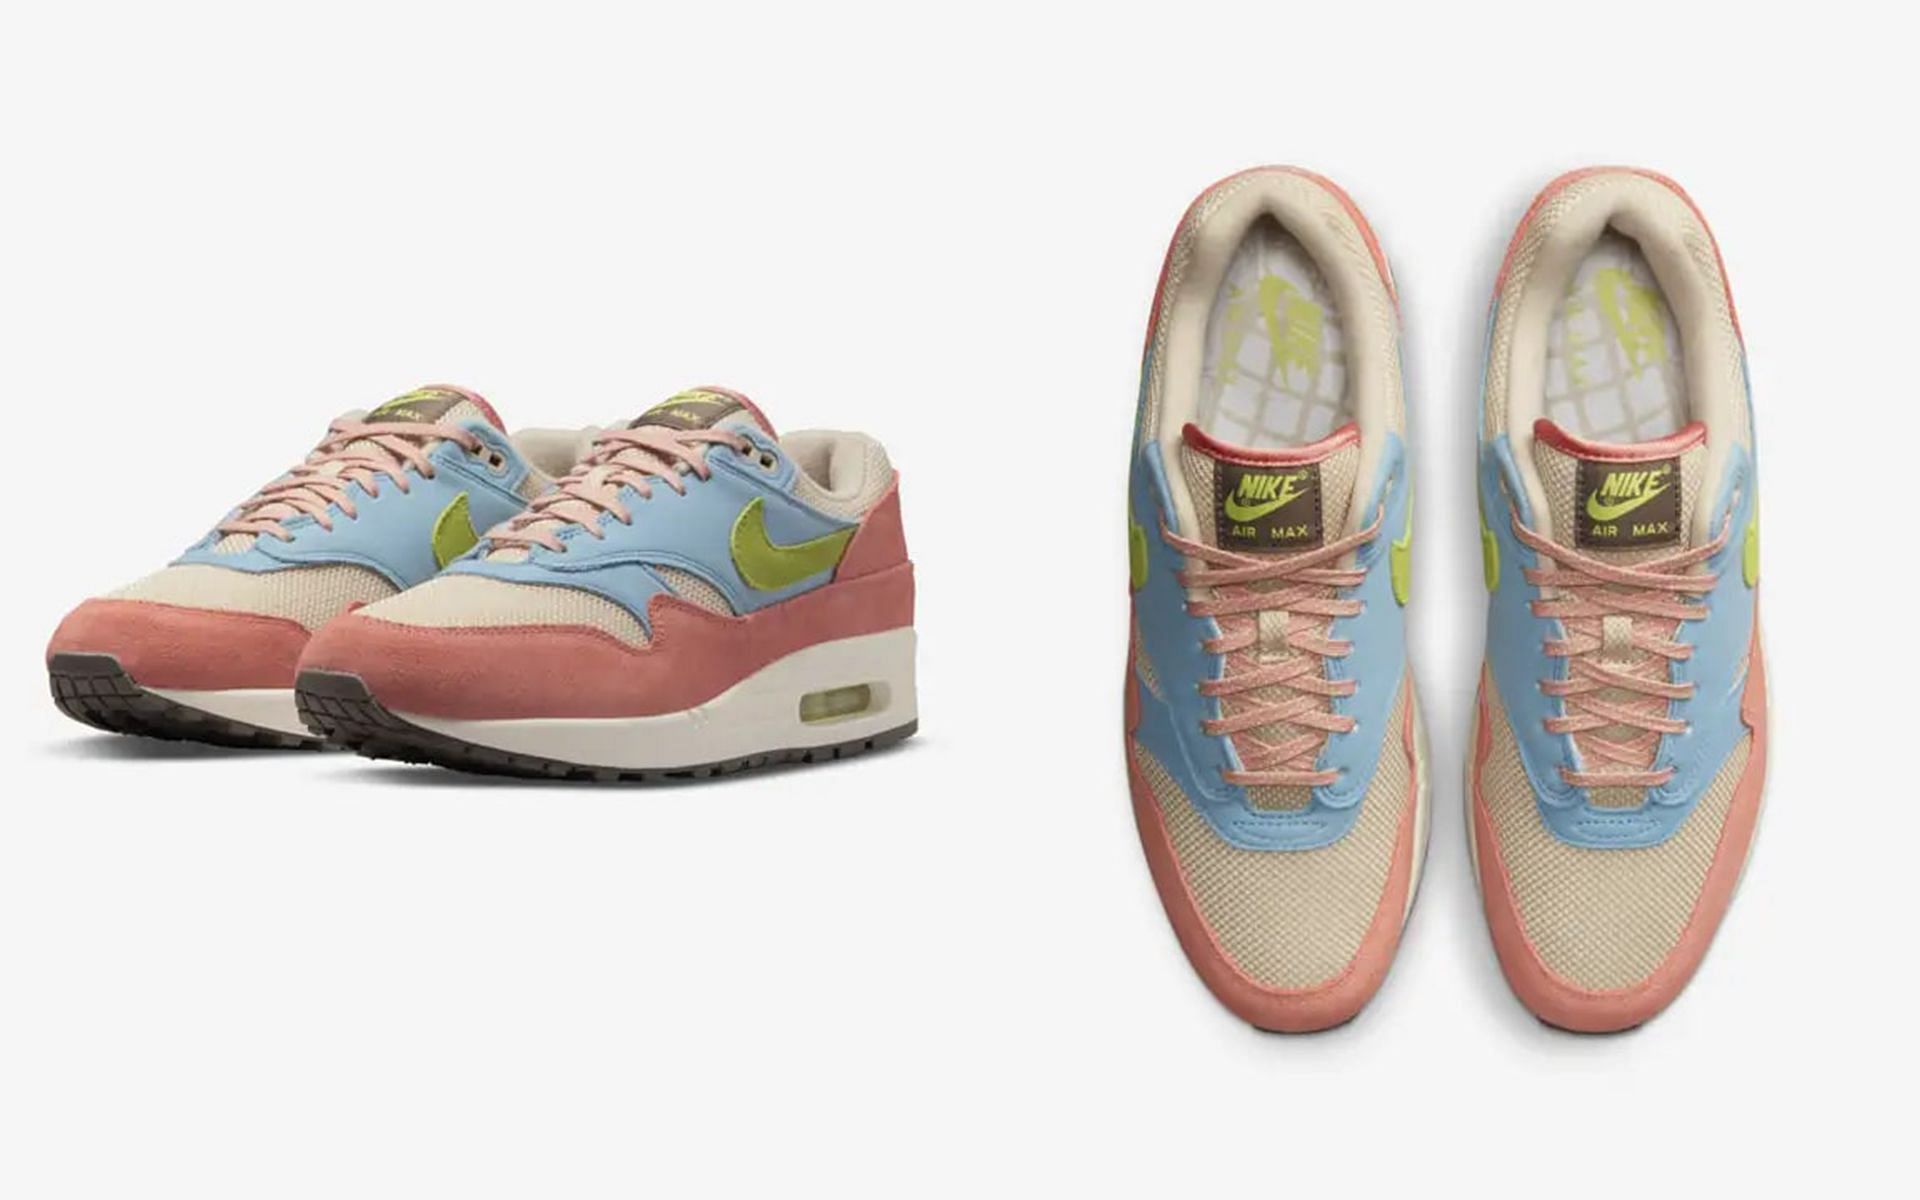 upcoming Air Max 1 Light Madder Root and Worn Blue sneakers (Image via Nike)